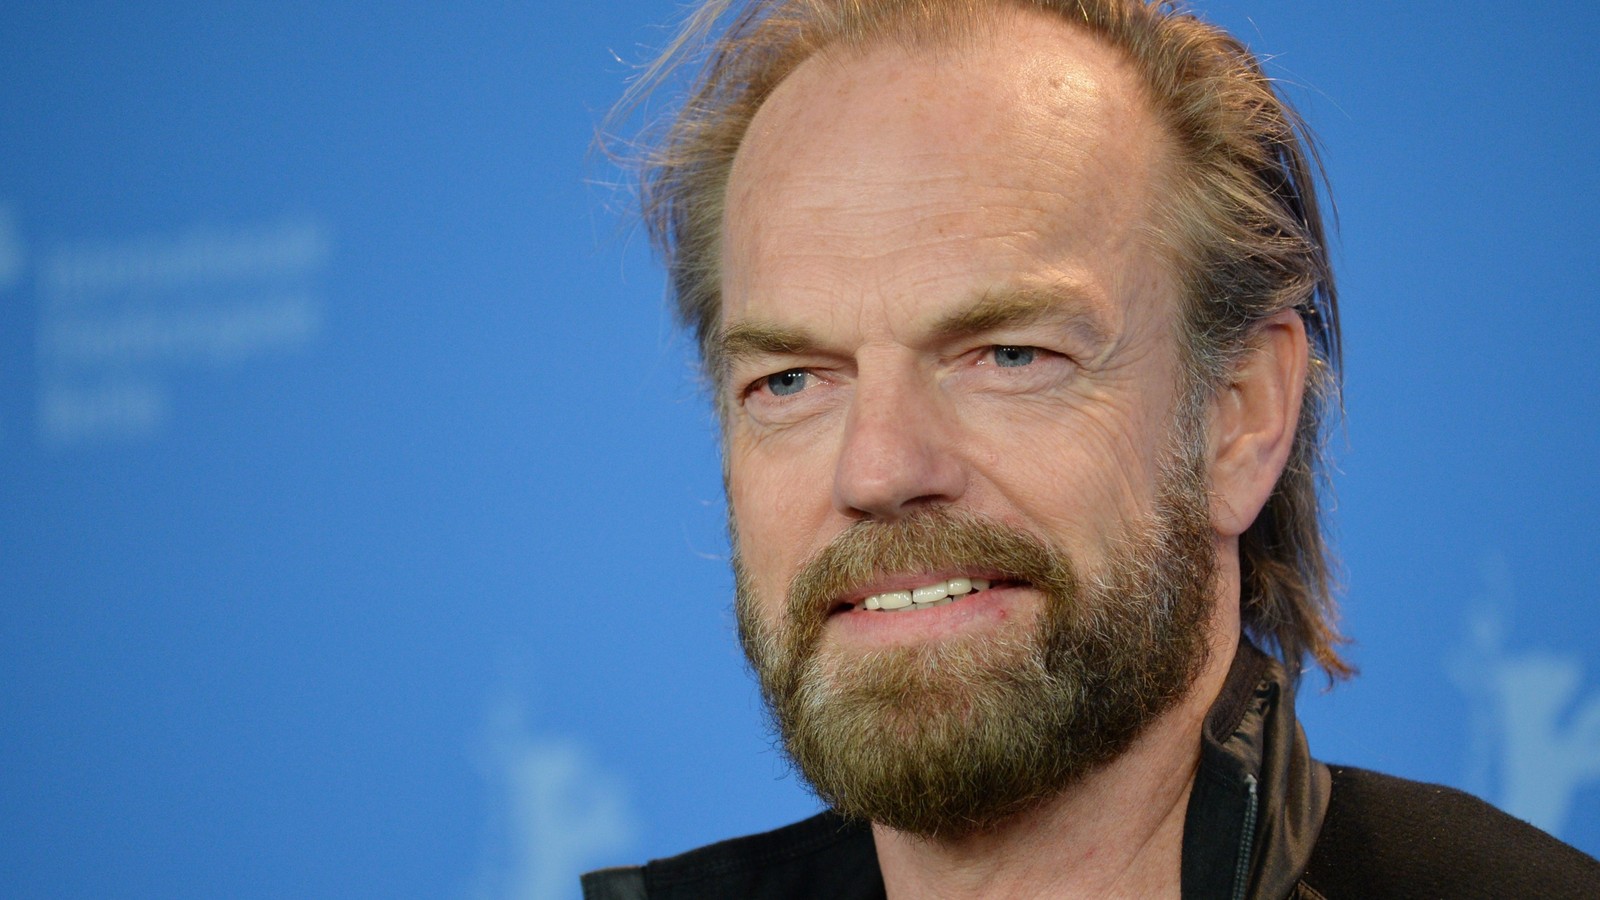 Mandatory Credit: Photo by PHILIPP GUELLAND/EPA-EFE/REX/Shutterstock (9419707ak)
Hugo Weaving
Black 47 &#8211; Photocall &#8211; 68th Berlin Film Festival, Germany &#8211; 16 Feb 2018
British-Australian actor Hugo Weaving poses during a photocall for &#8216;Black 47&#8217; at the 68th annual Berlin International Film Festival (Berlinale), in Berlin, Germany, 16 February 2018. The Berlinale runs from 15 to 25 February.
